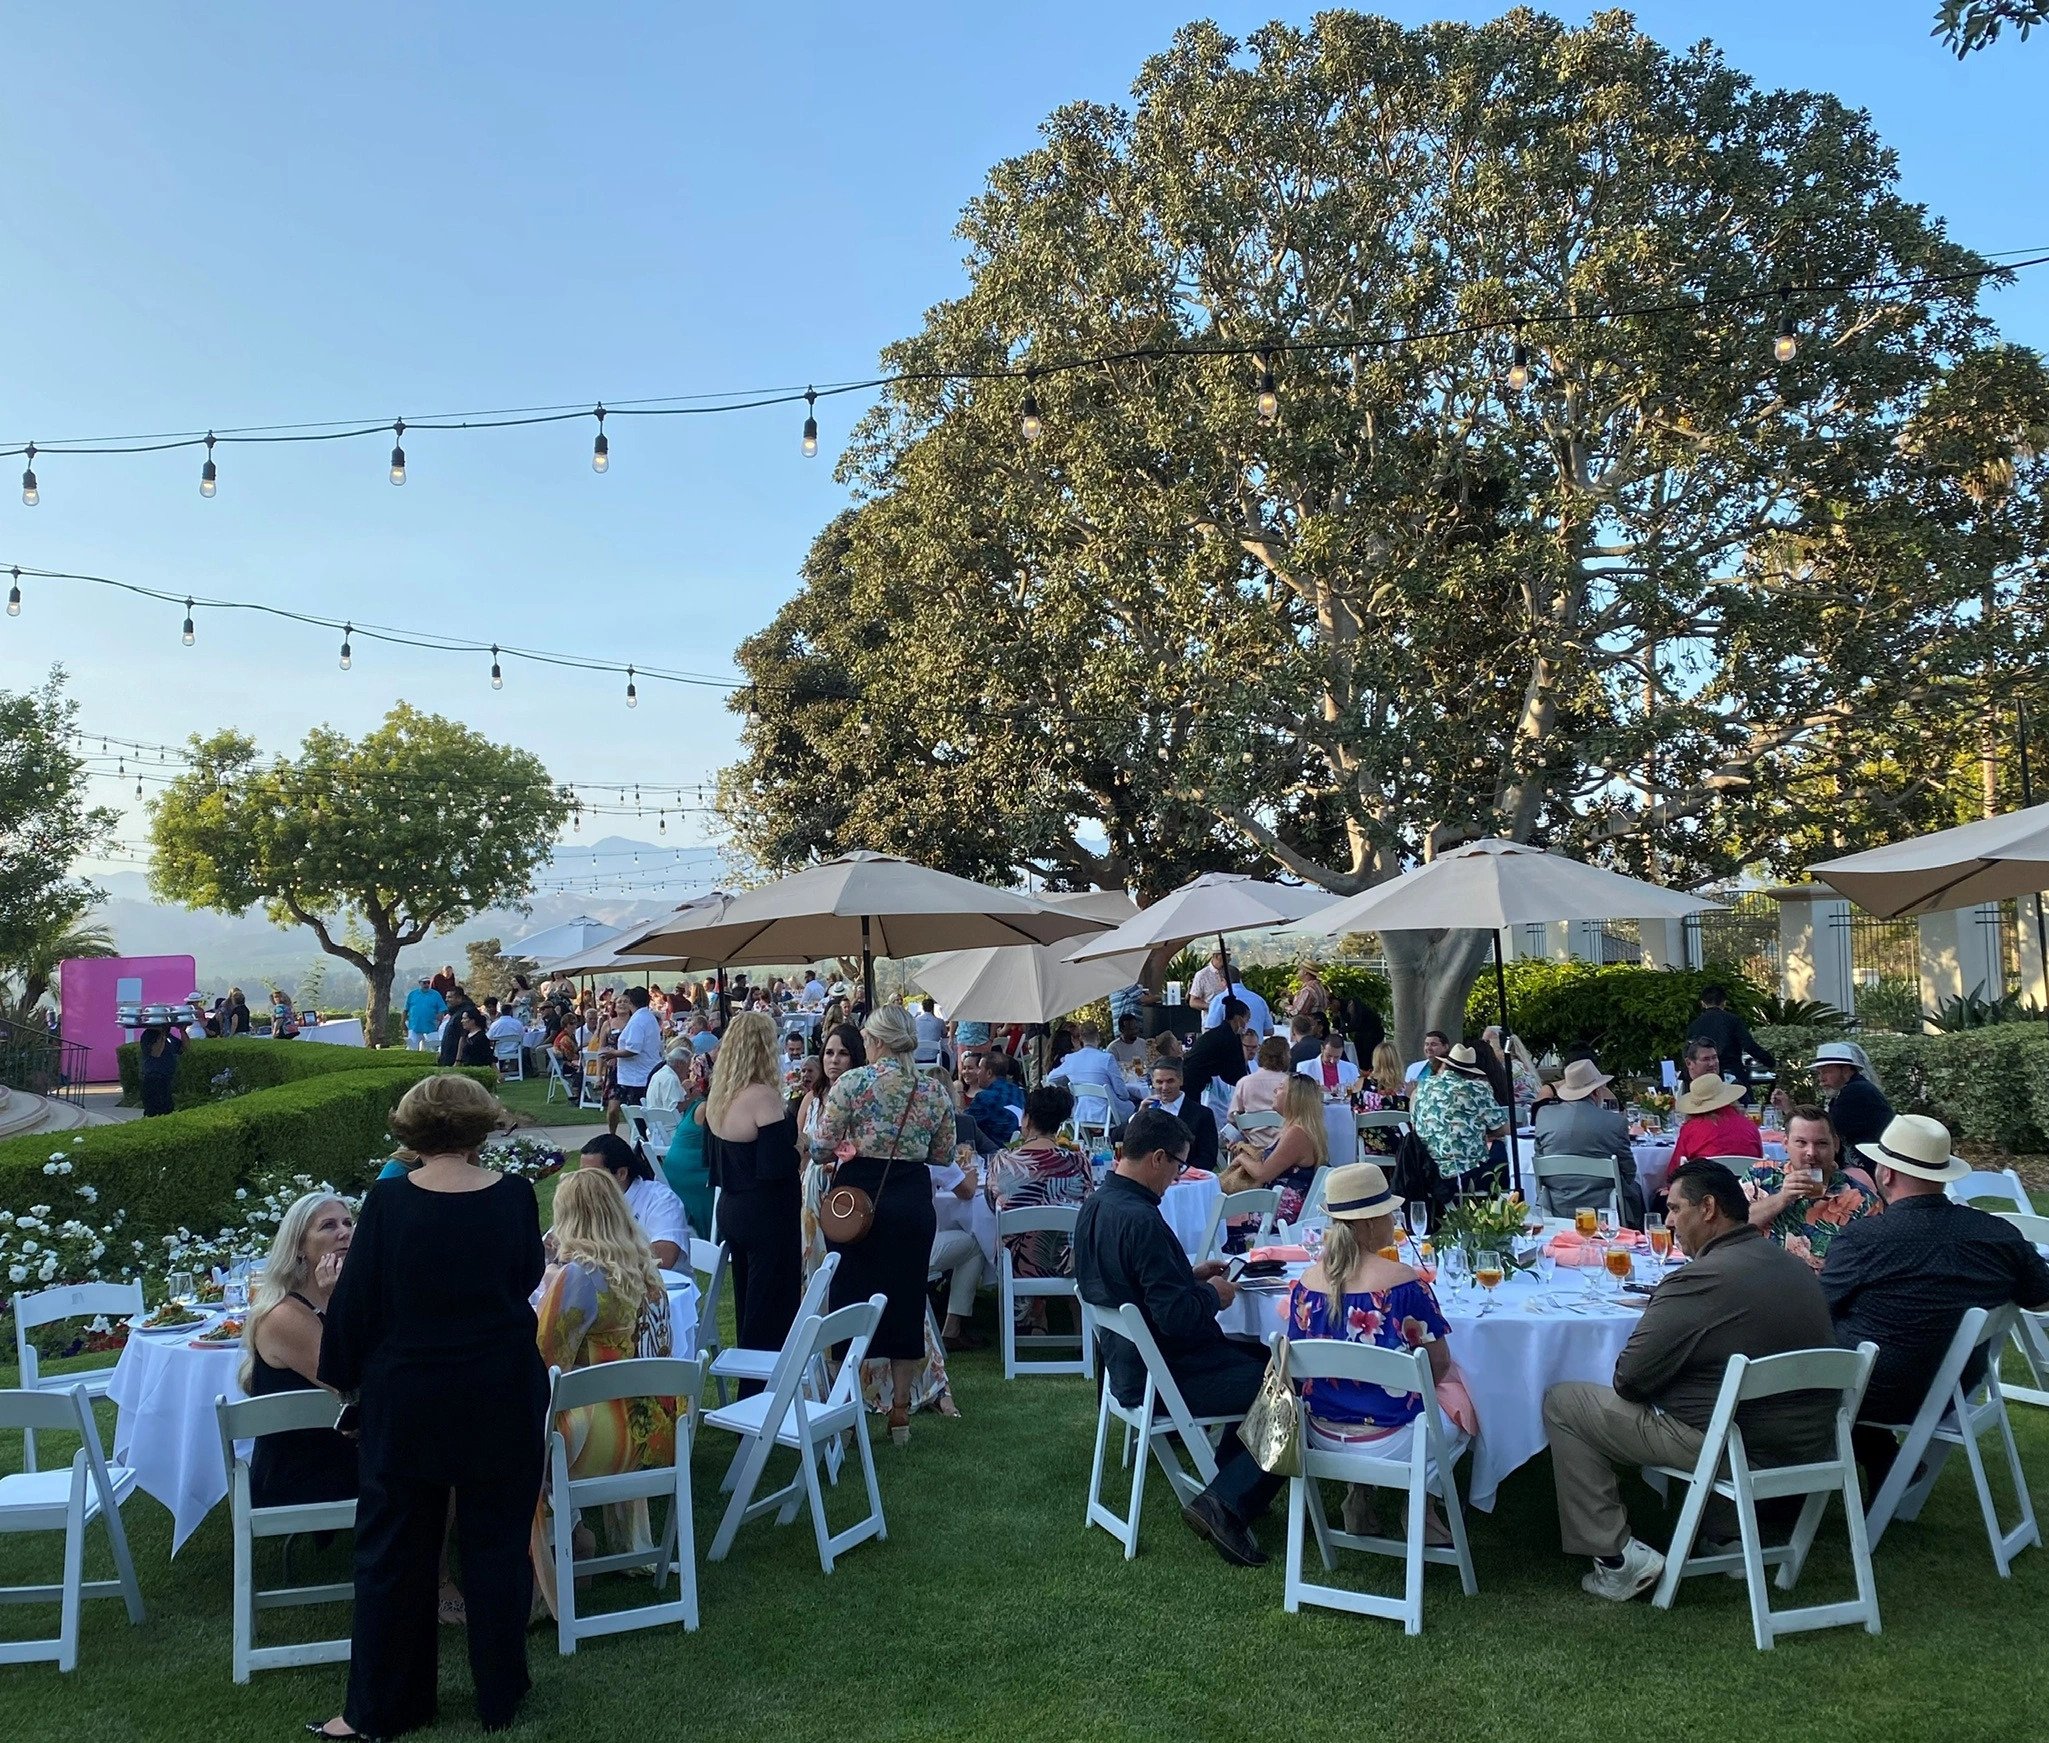 CAI Channel Islands Chapter 40TH Anniversary Celebration in July 2021 